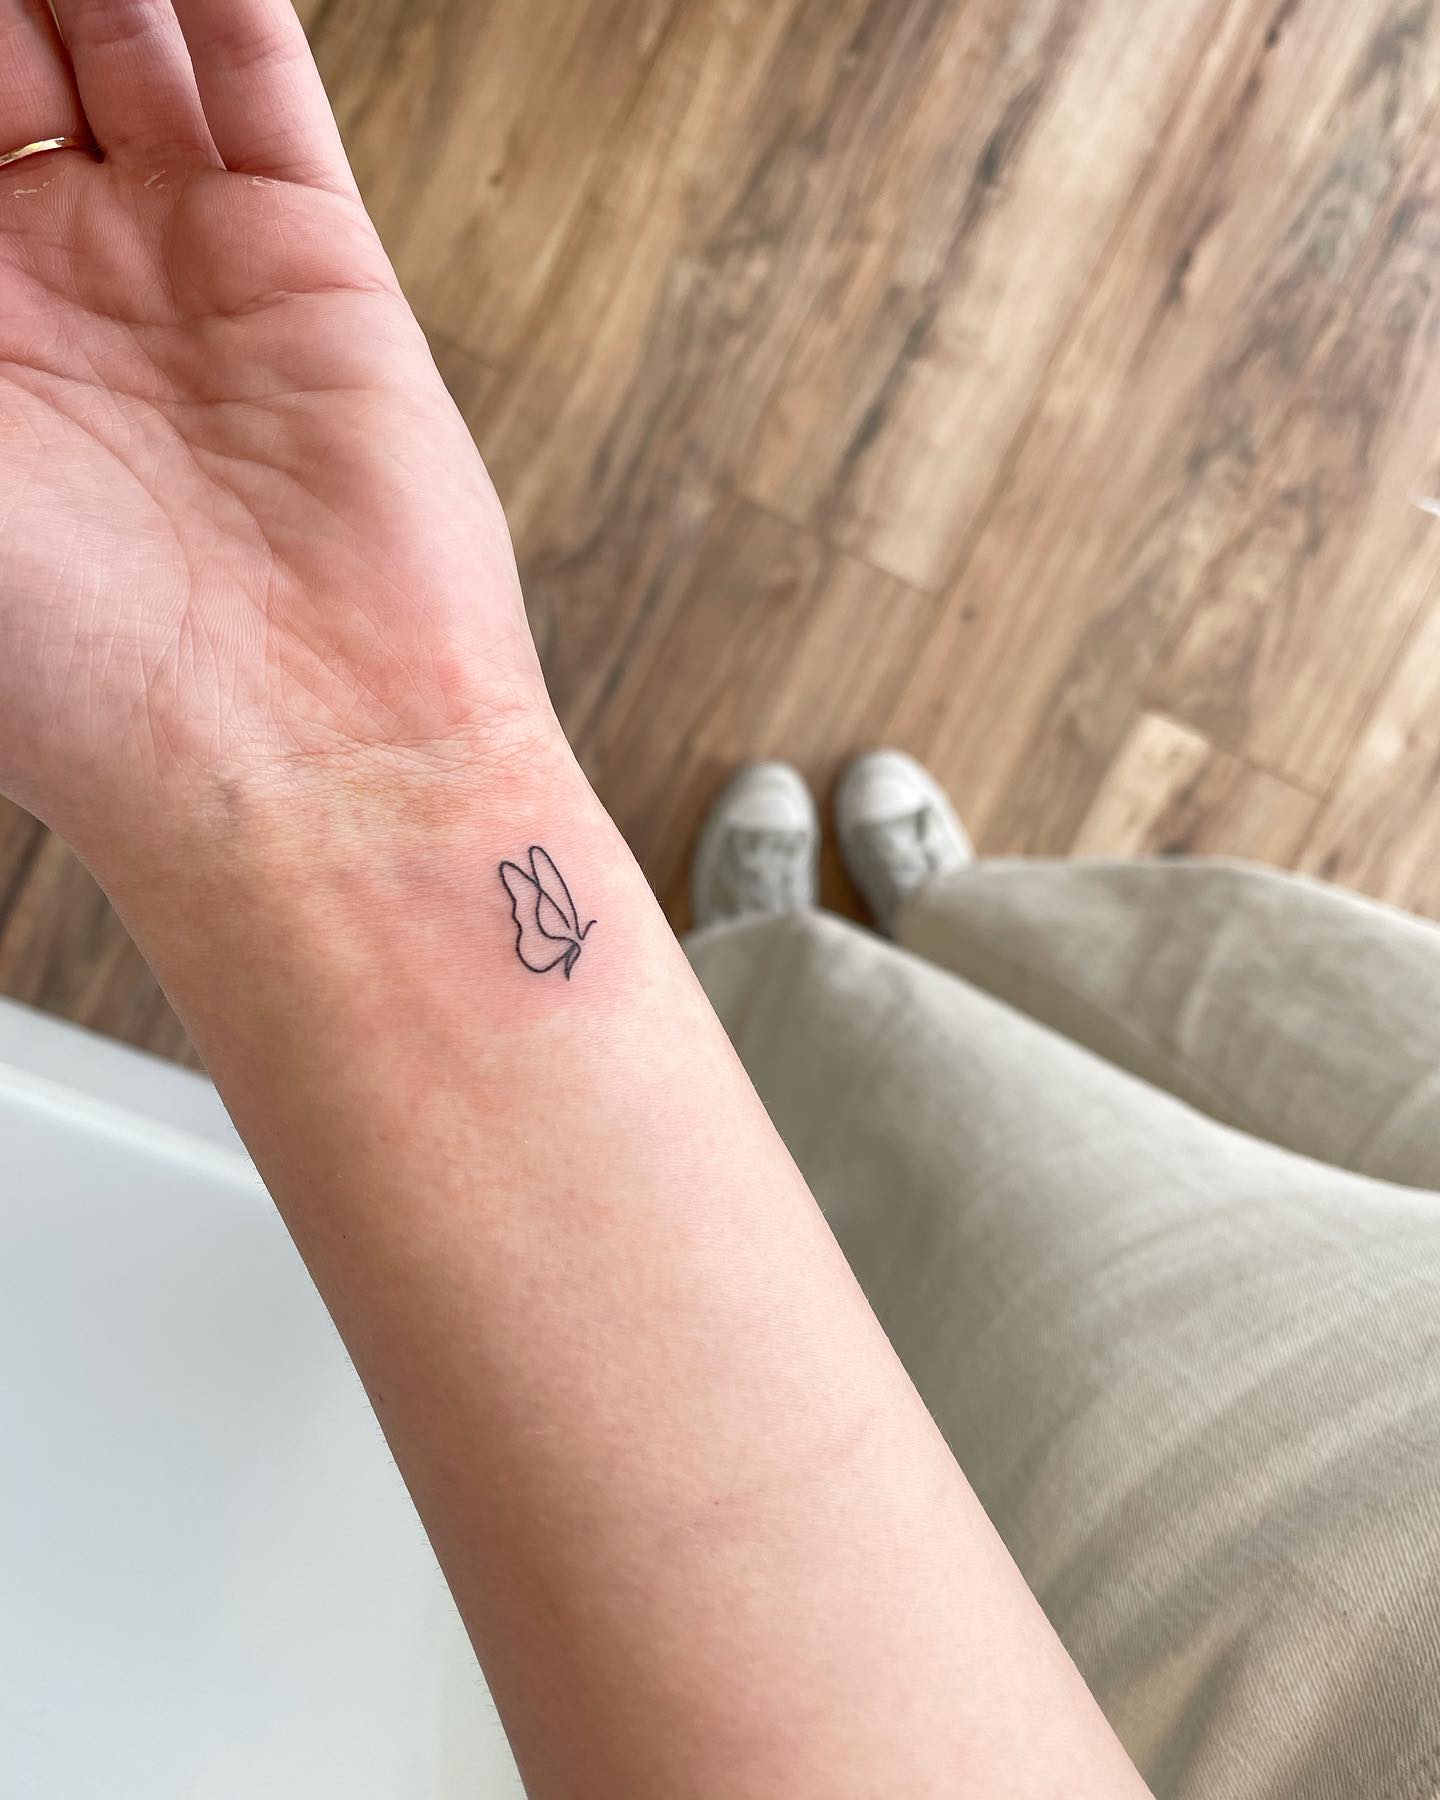 101 Tiny Tattoos to Inspire and Excite You!